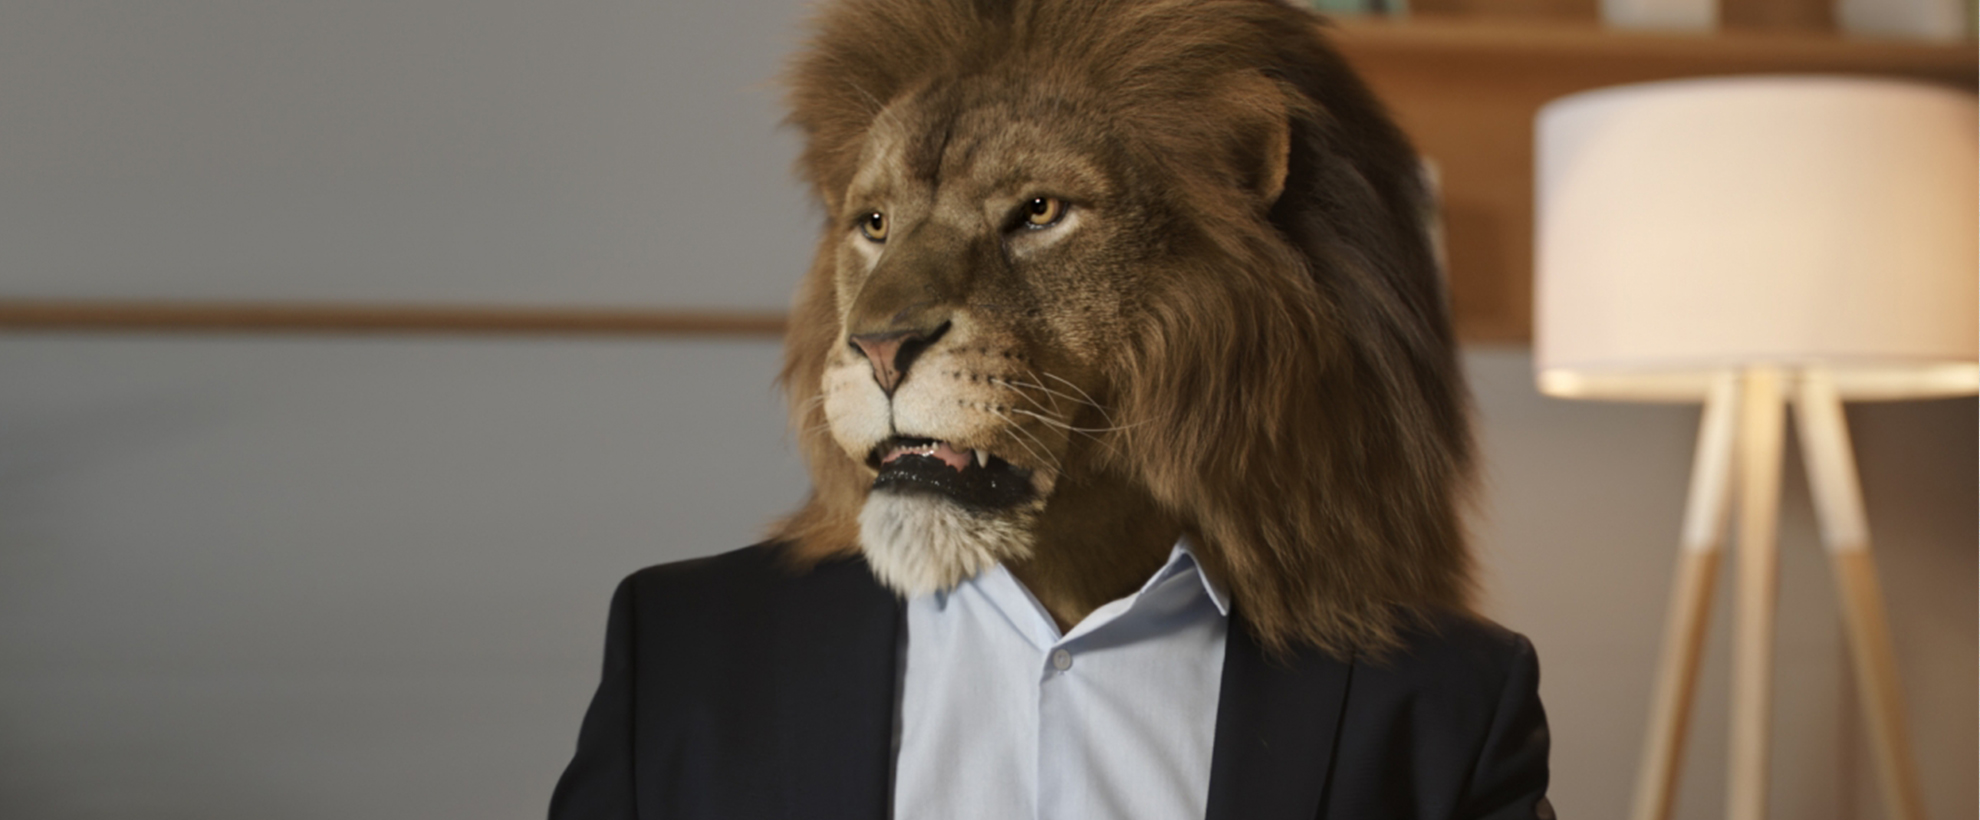 A lion head on a man's body wearing a suit